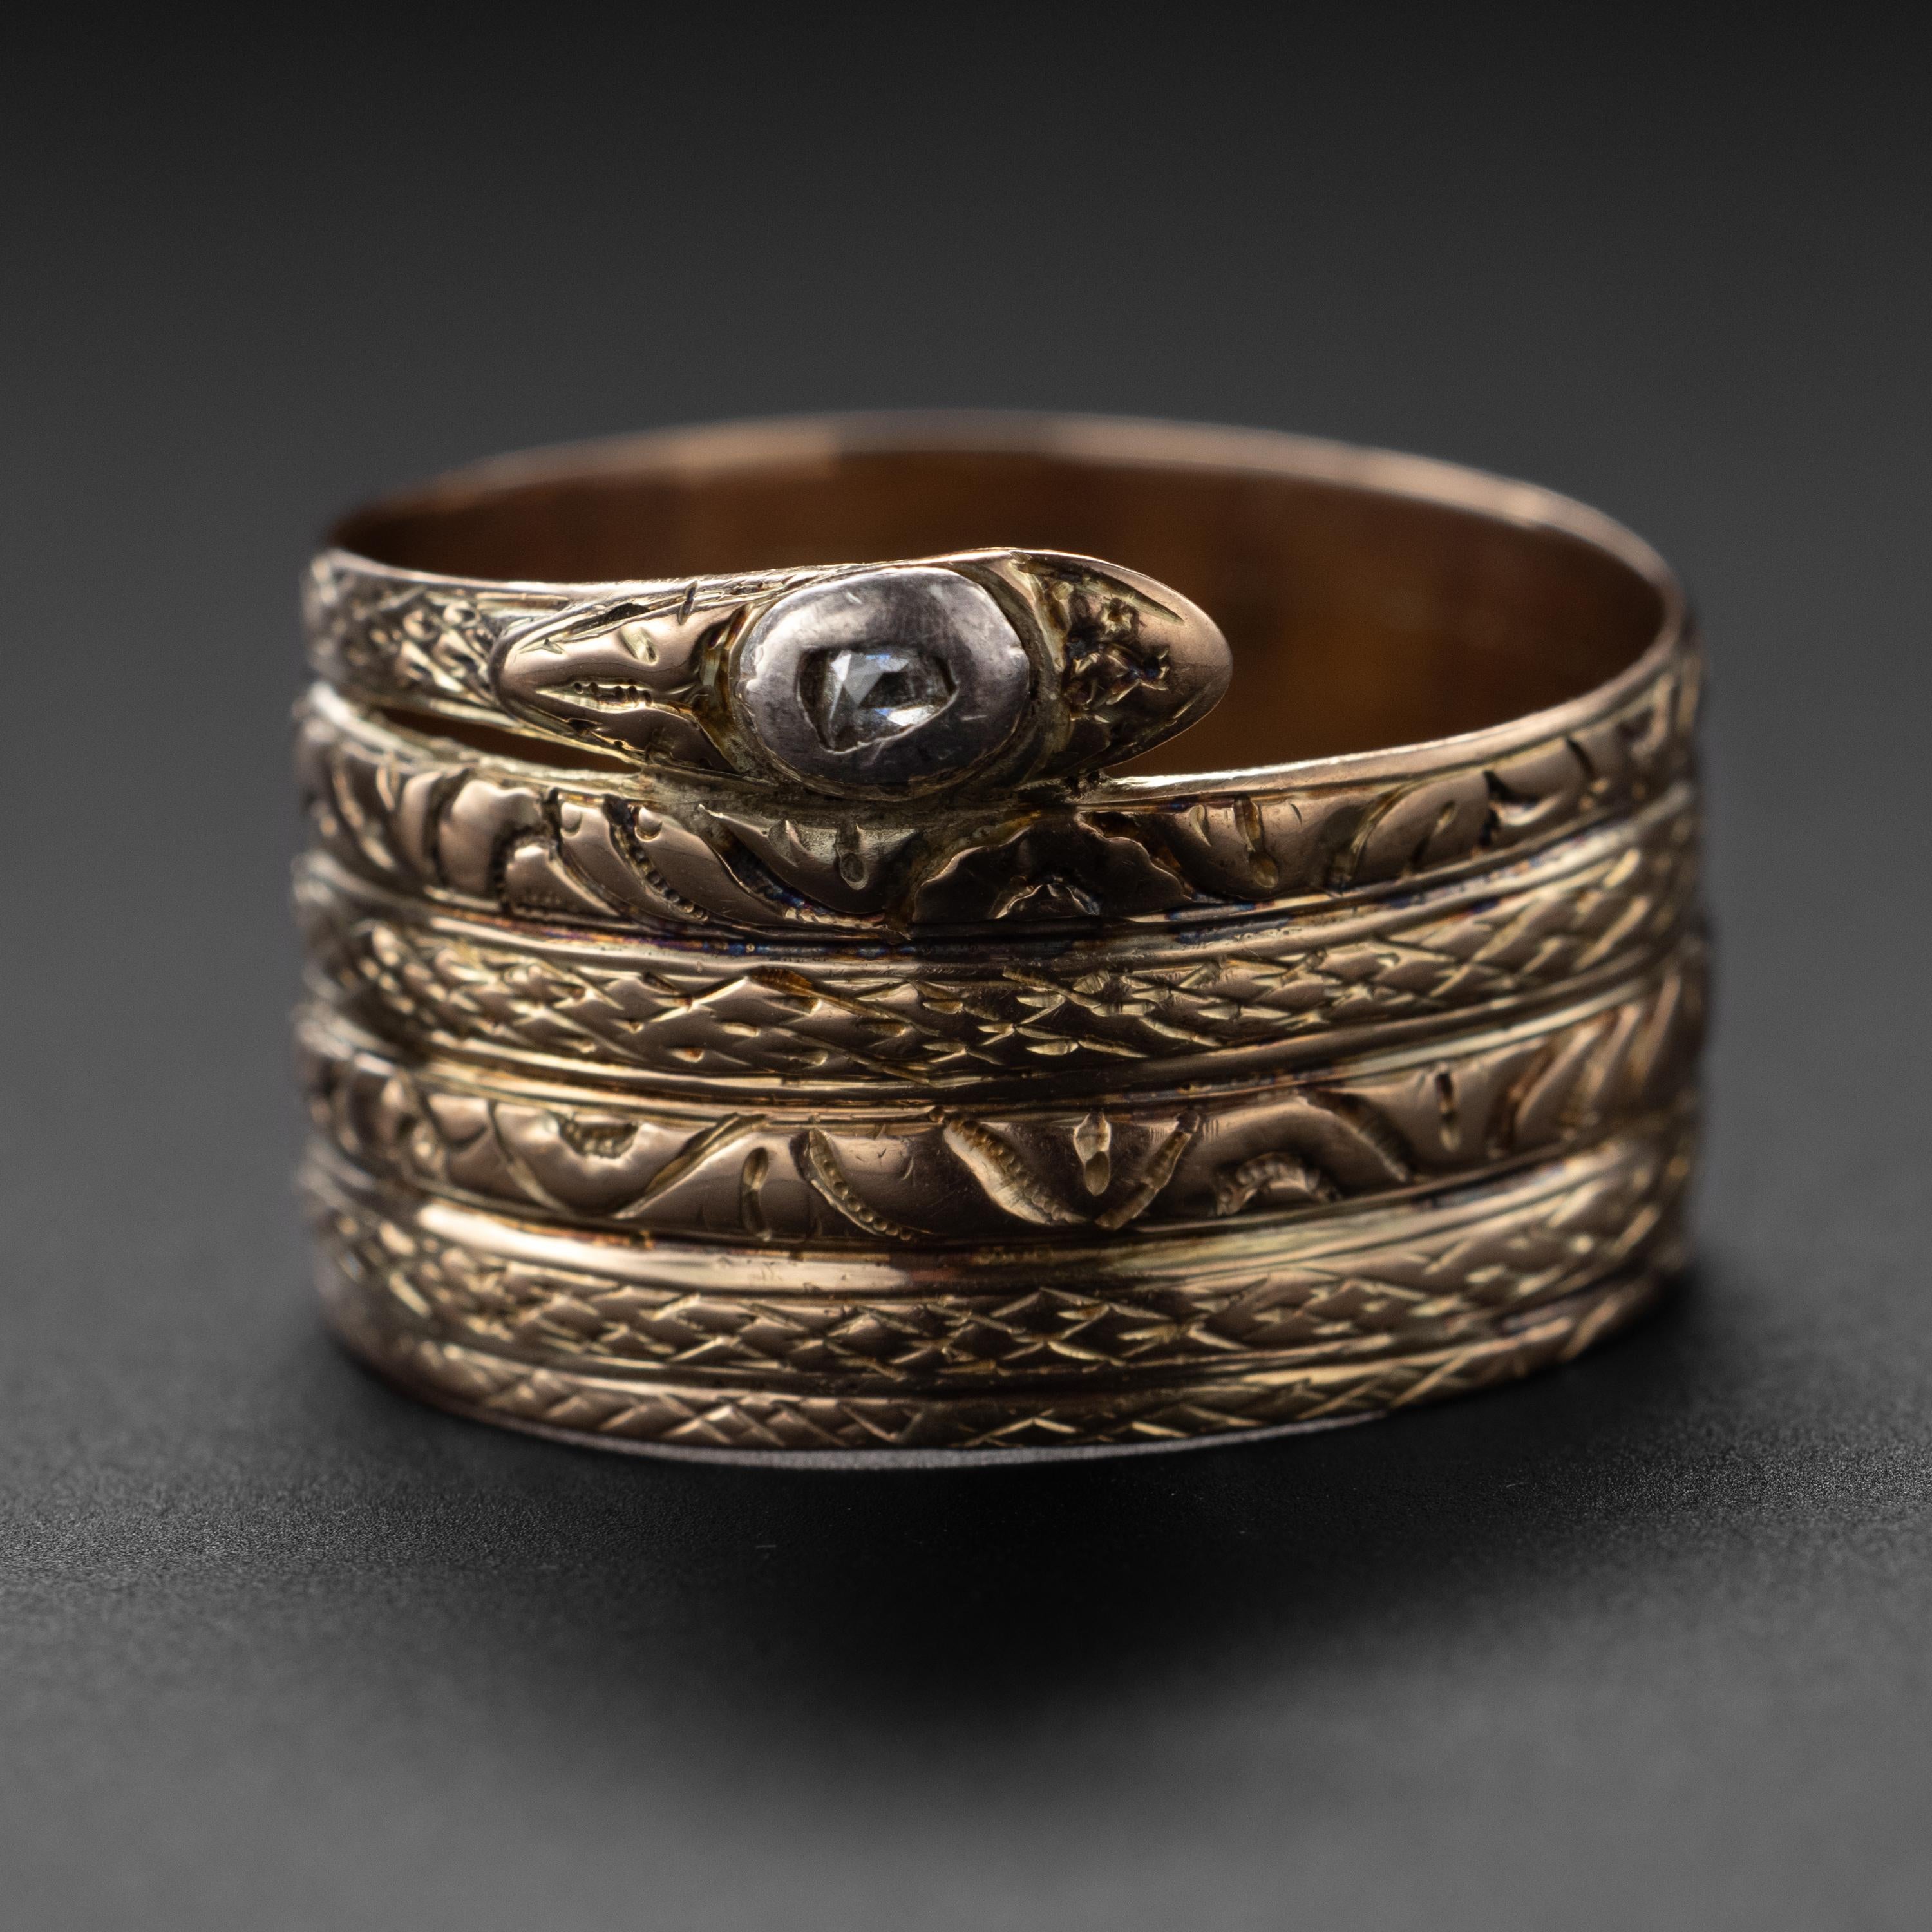 Spectacular and rare: this 19th-century snake ring was created by hand-pulled gold wire which was pounded flat, coiled, fused and engraved with rich detailing. A small diamond set inside a chunky silver bezel forms the crown of the snake. This thin